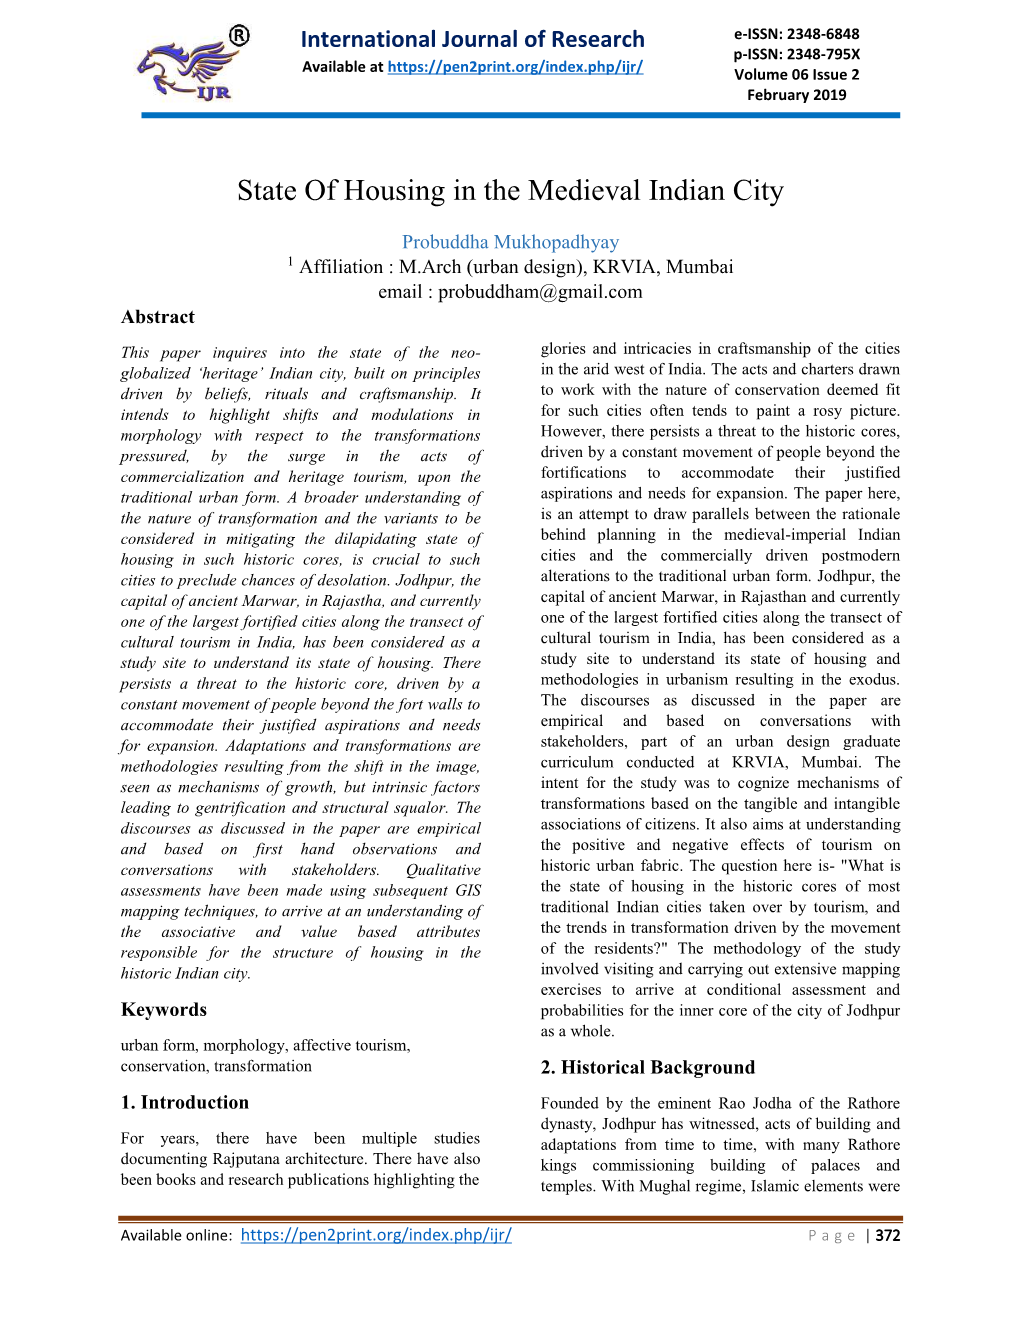 State of Housing in the Medieval Indian City